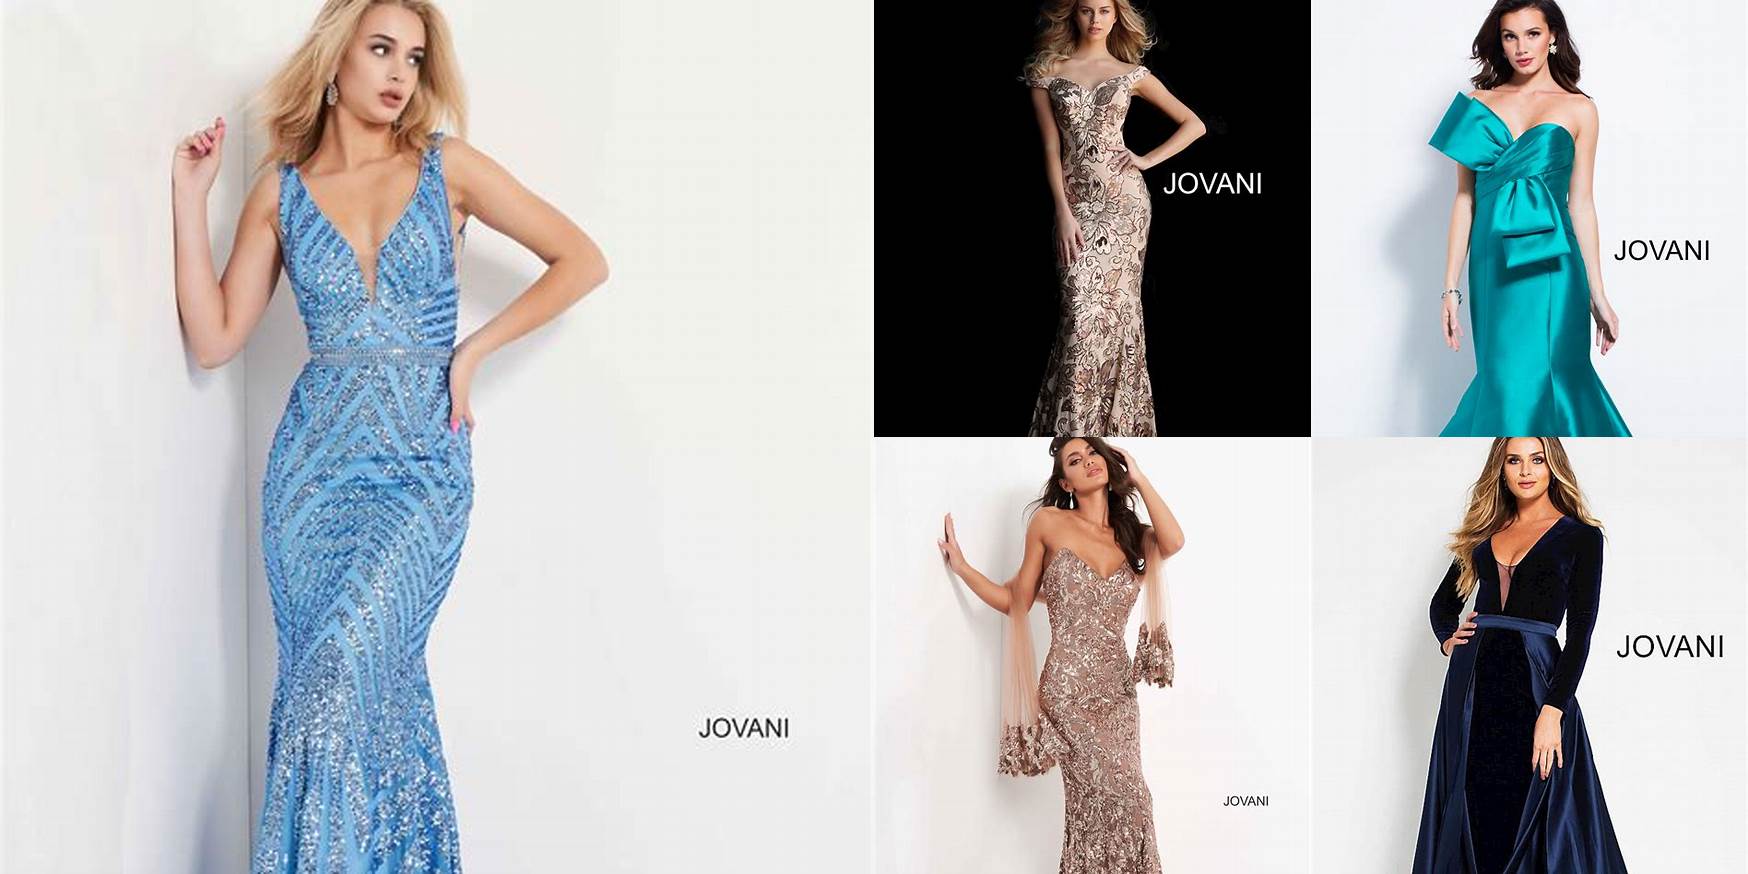 How Much Is A Jovani Dress